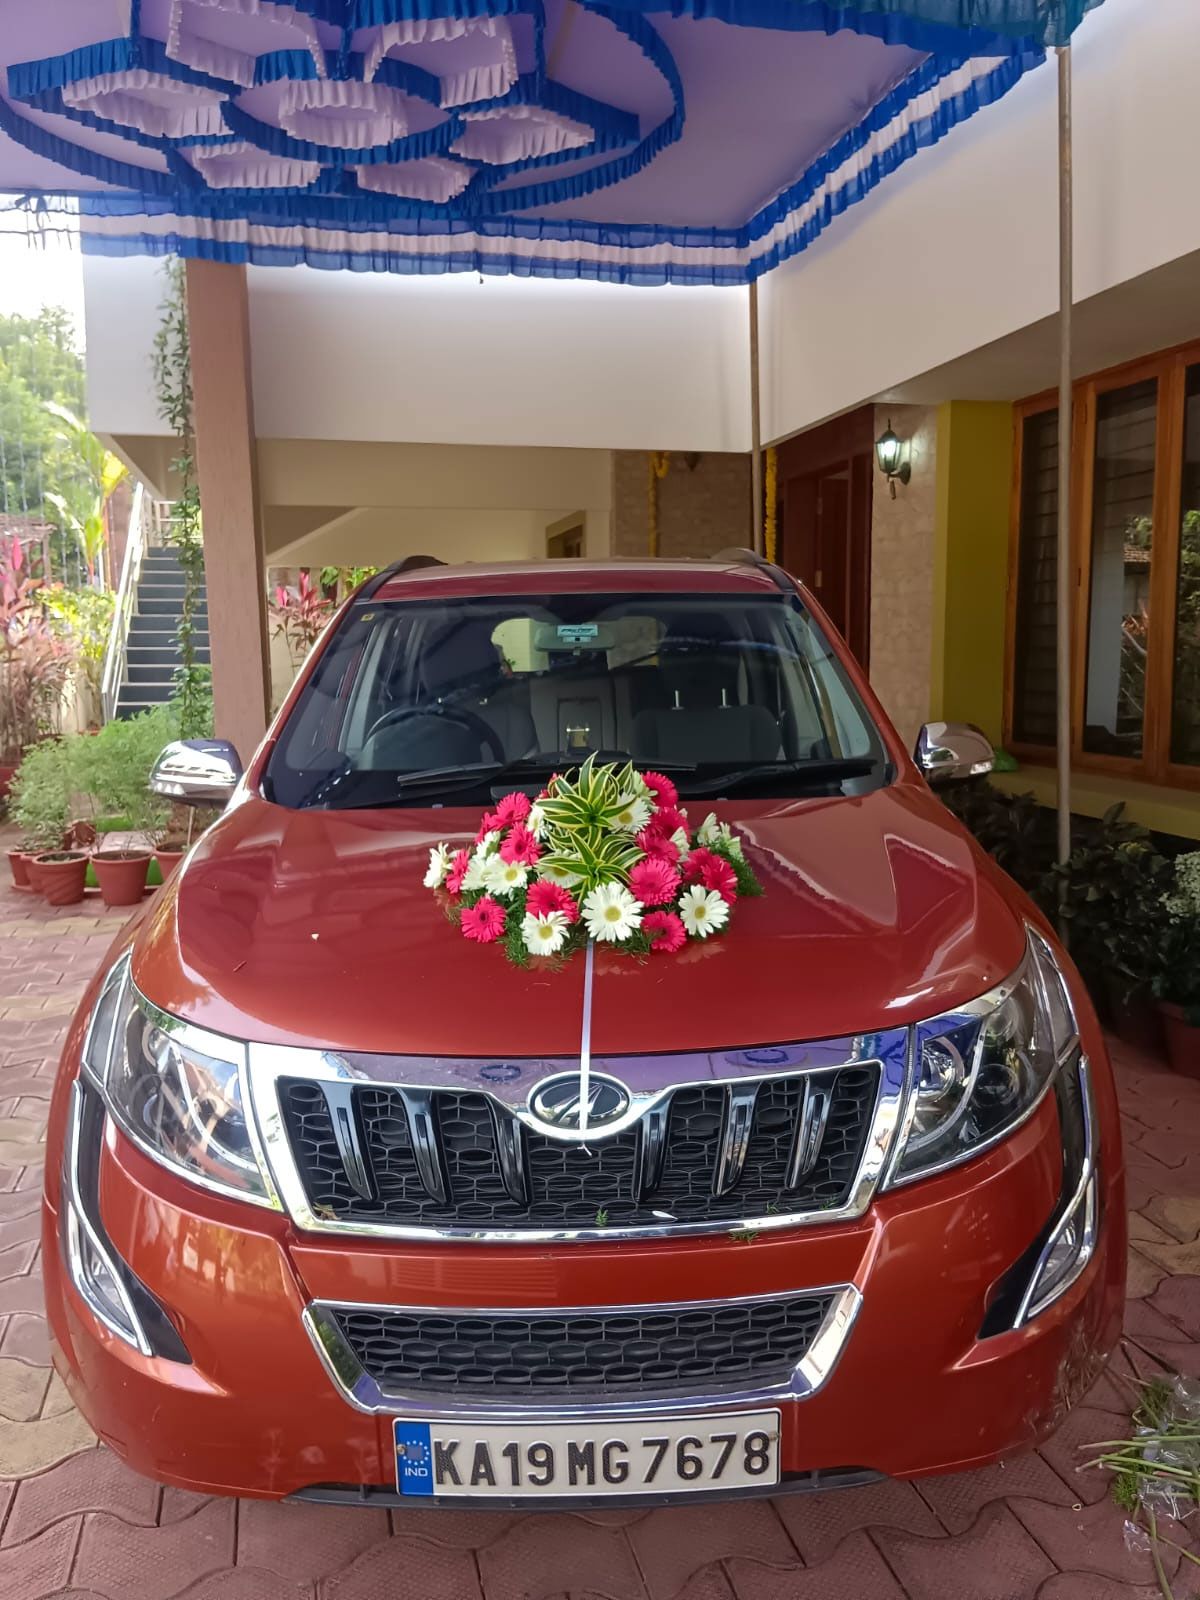 What is needed to decorate a car for a wedding? - Quora